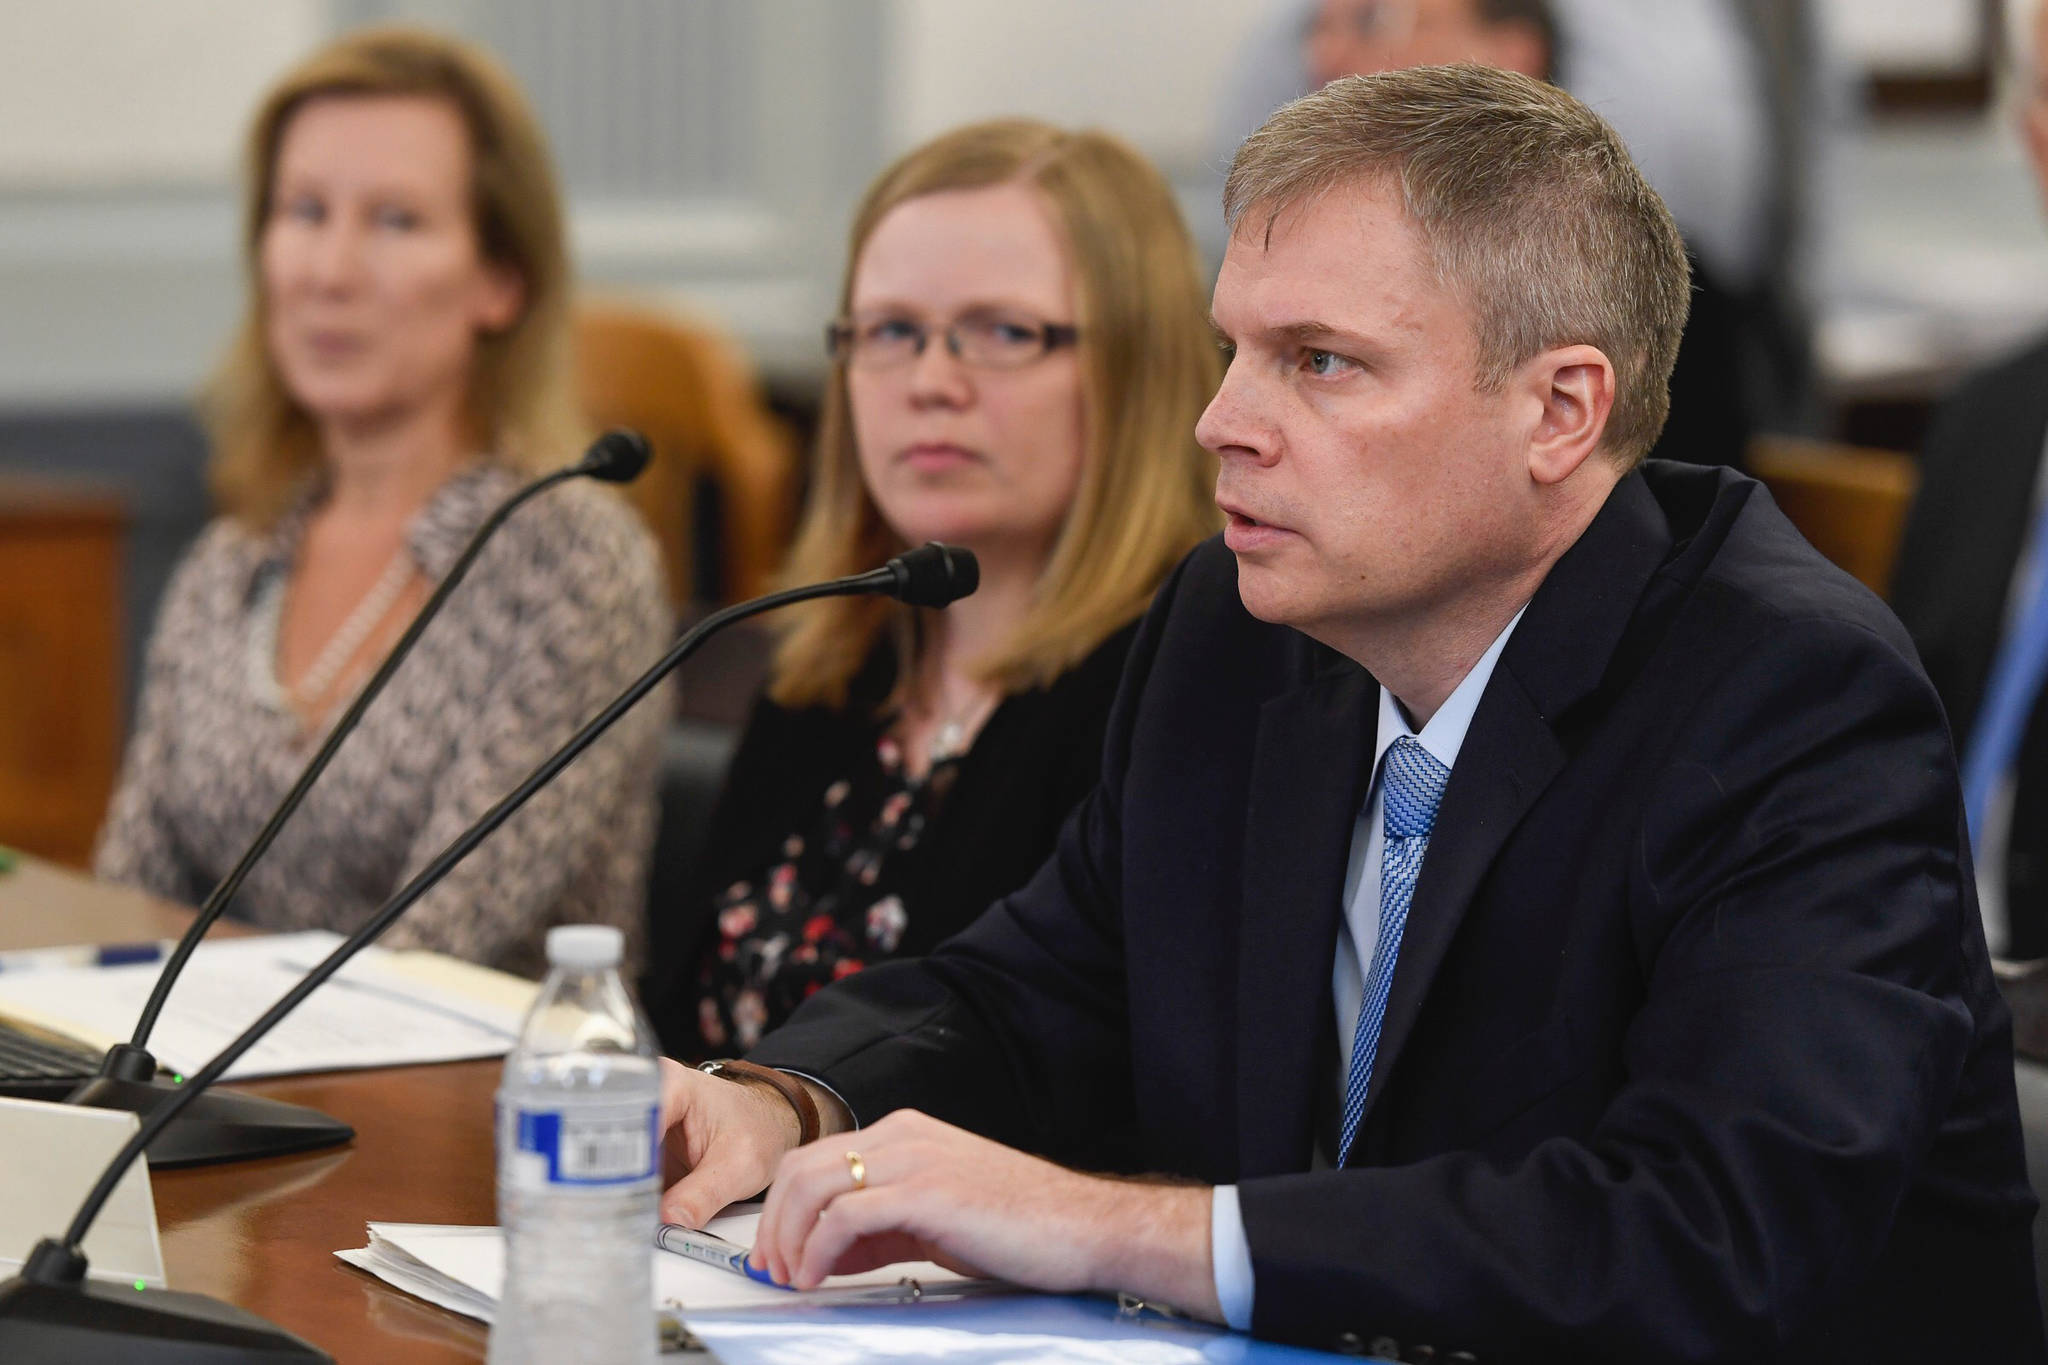 Dr. Michael Johnson, Commissioner of Alaska Department of Education and Early Development, speaks about a reduced funding for education to the Senate Finance Committee at the Capitol on Monday Feb. 18, 2019. (Michael Penn ι Juneau Empire)